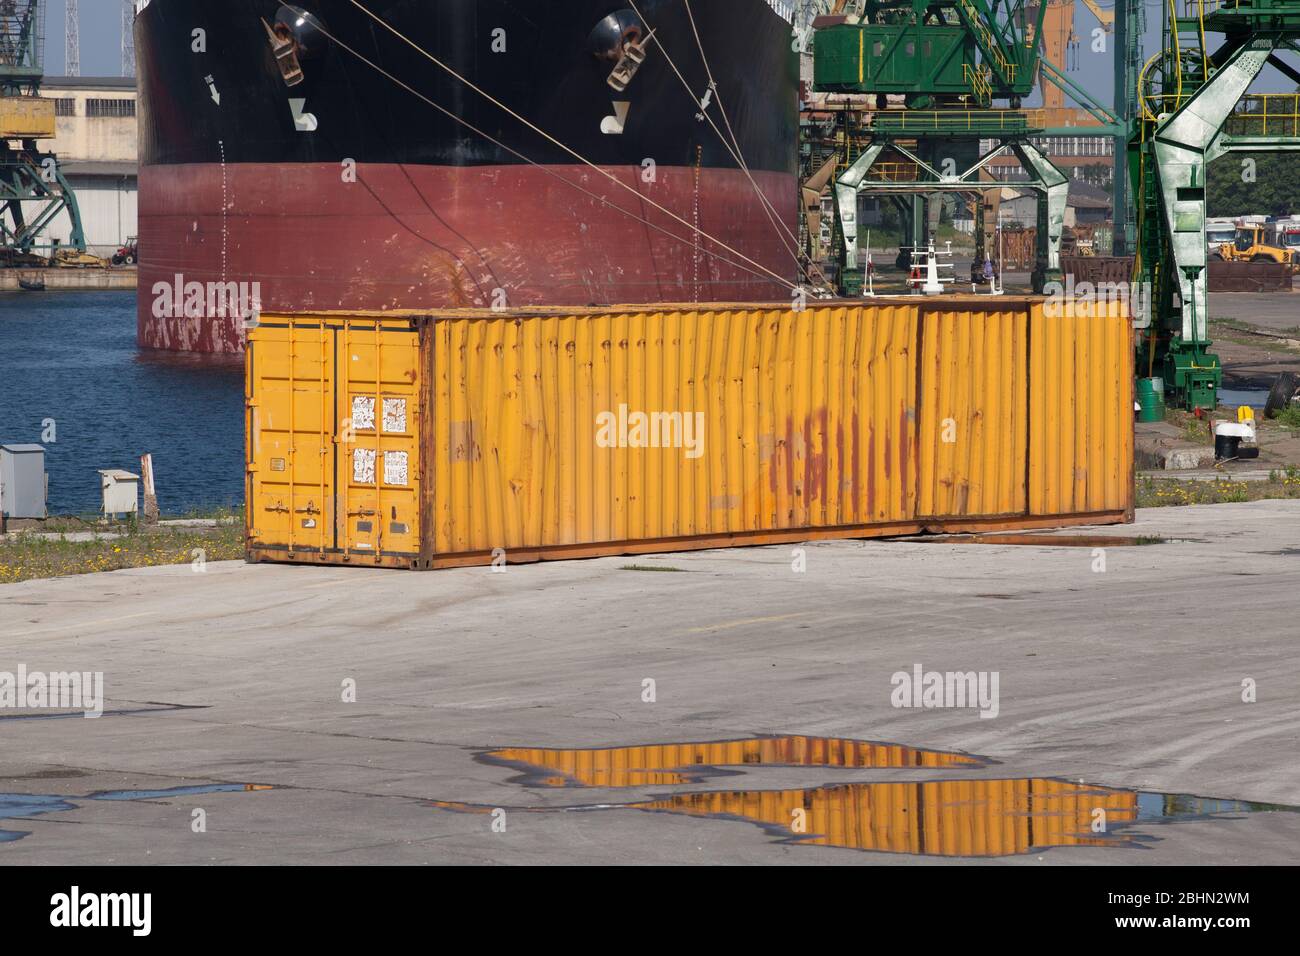 Grungy yellow old cargo container stands in a harbor district, industrial shipping equipment Stock Photo